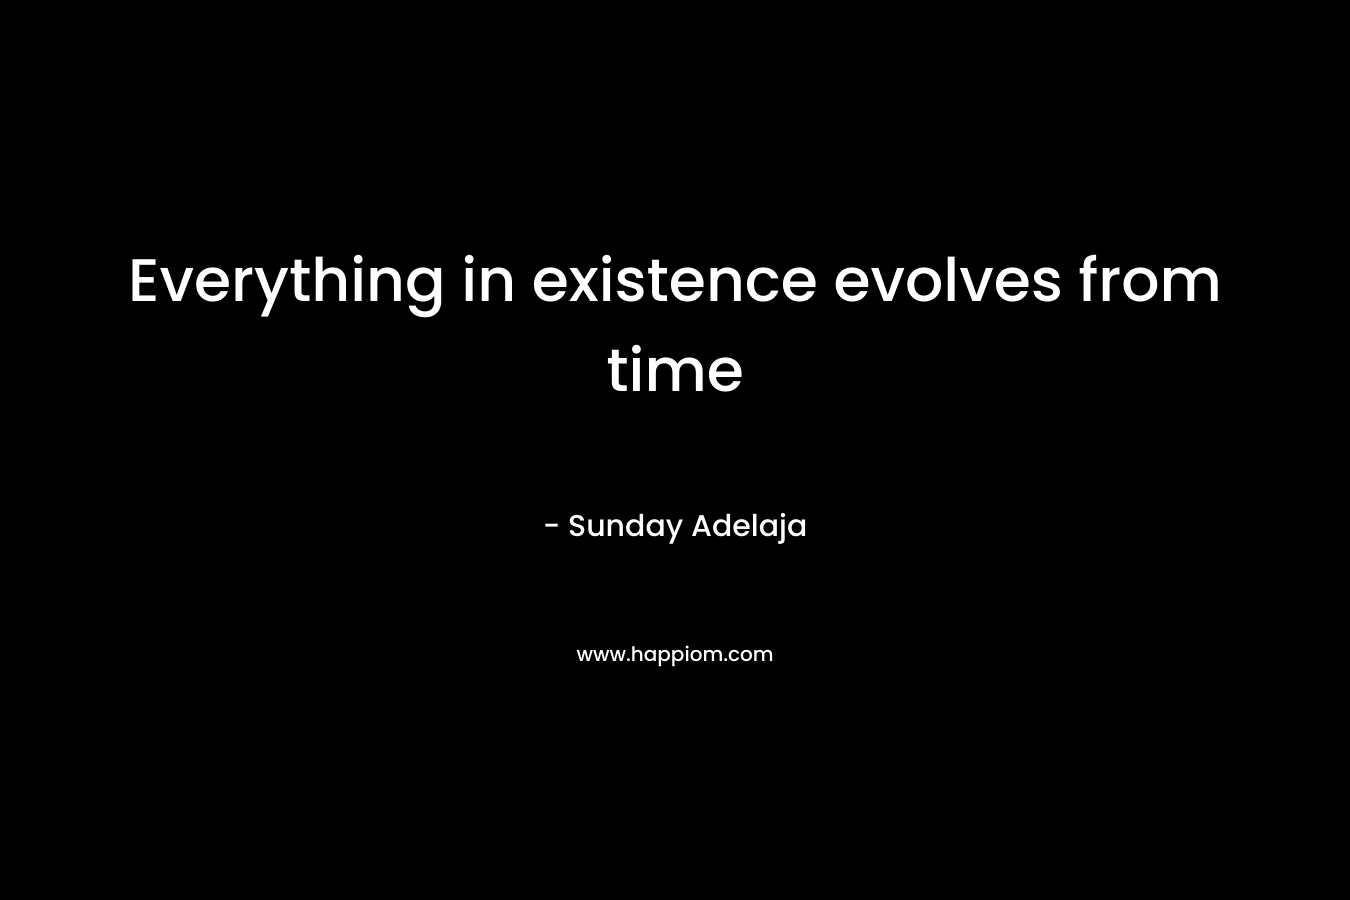 Everything in existence evolves from time